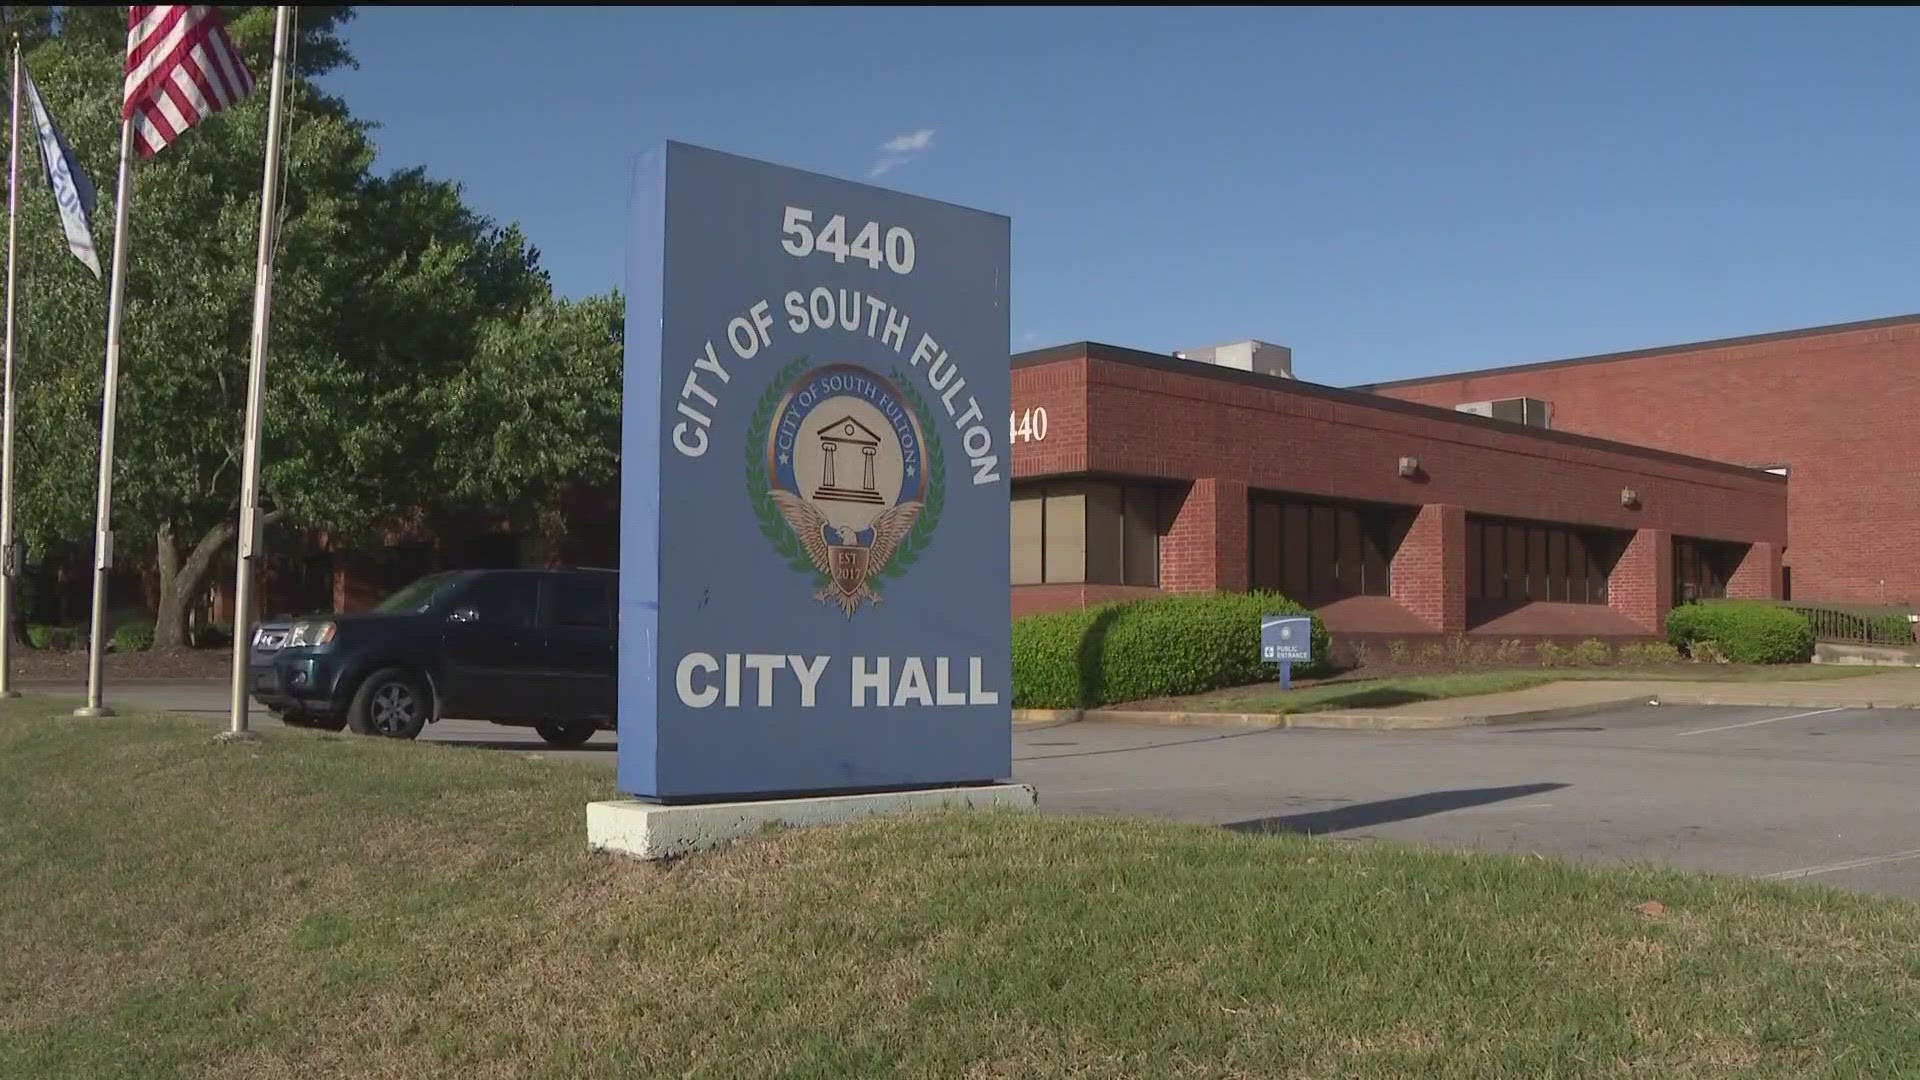 Many are celebrating South Fulton's 6th birthday, while others who live in the city are pushing for it to be deannexed back into unincorporated Fulton County.